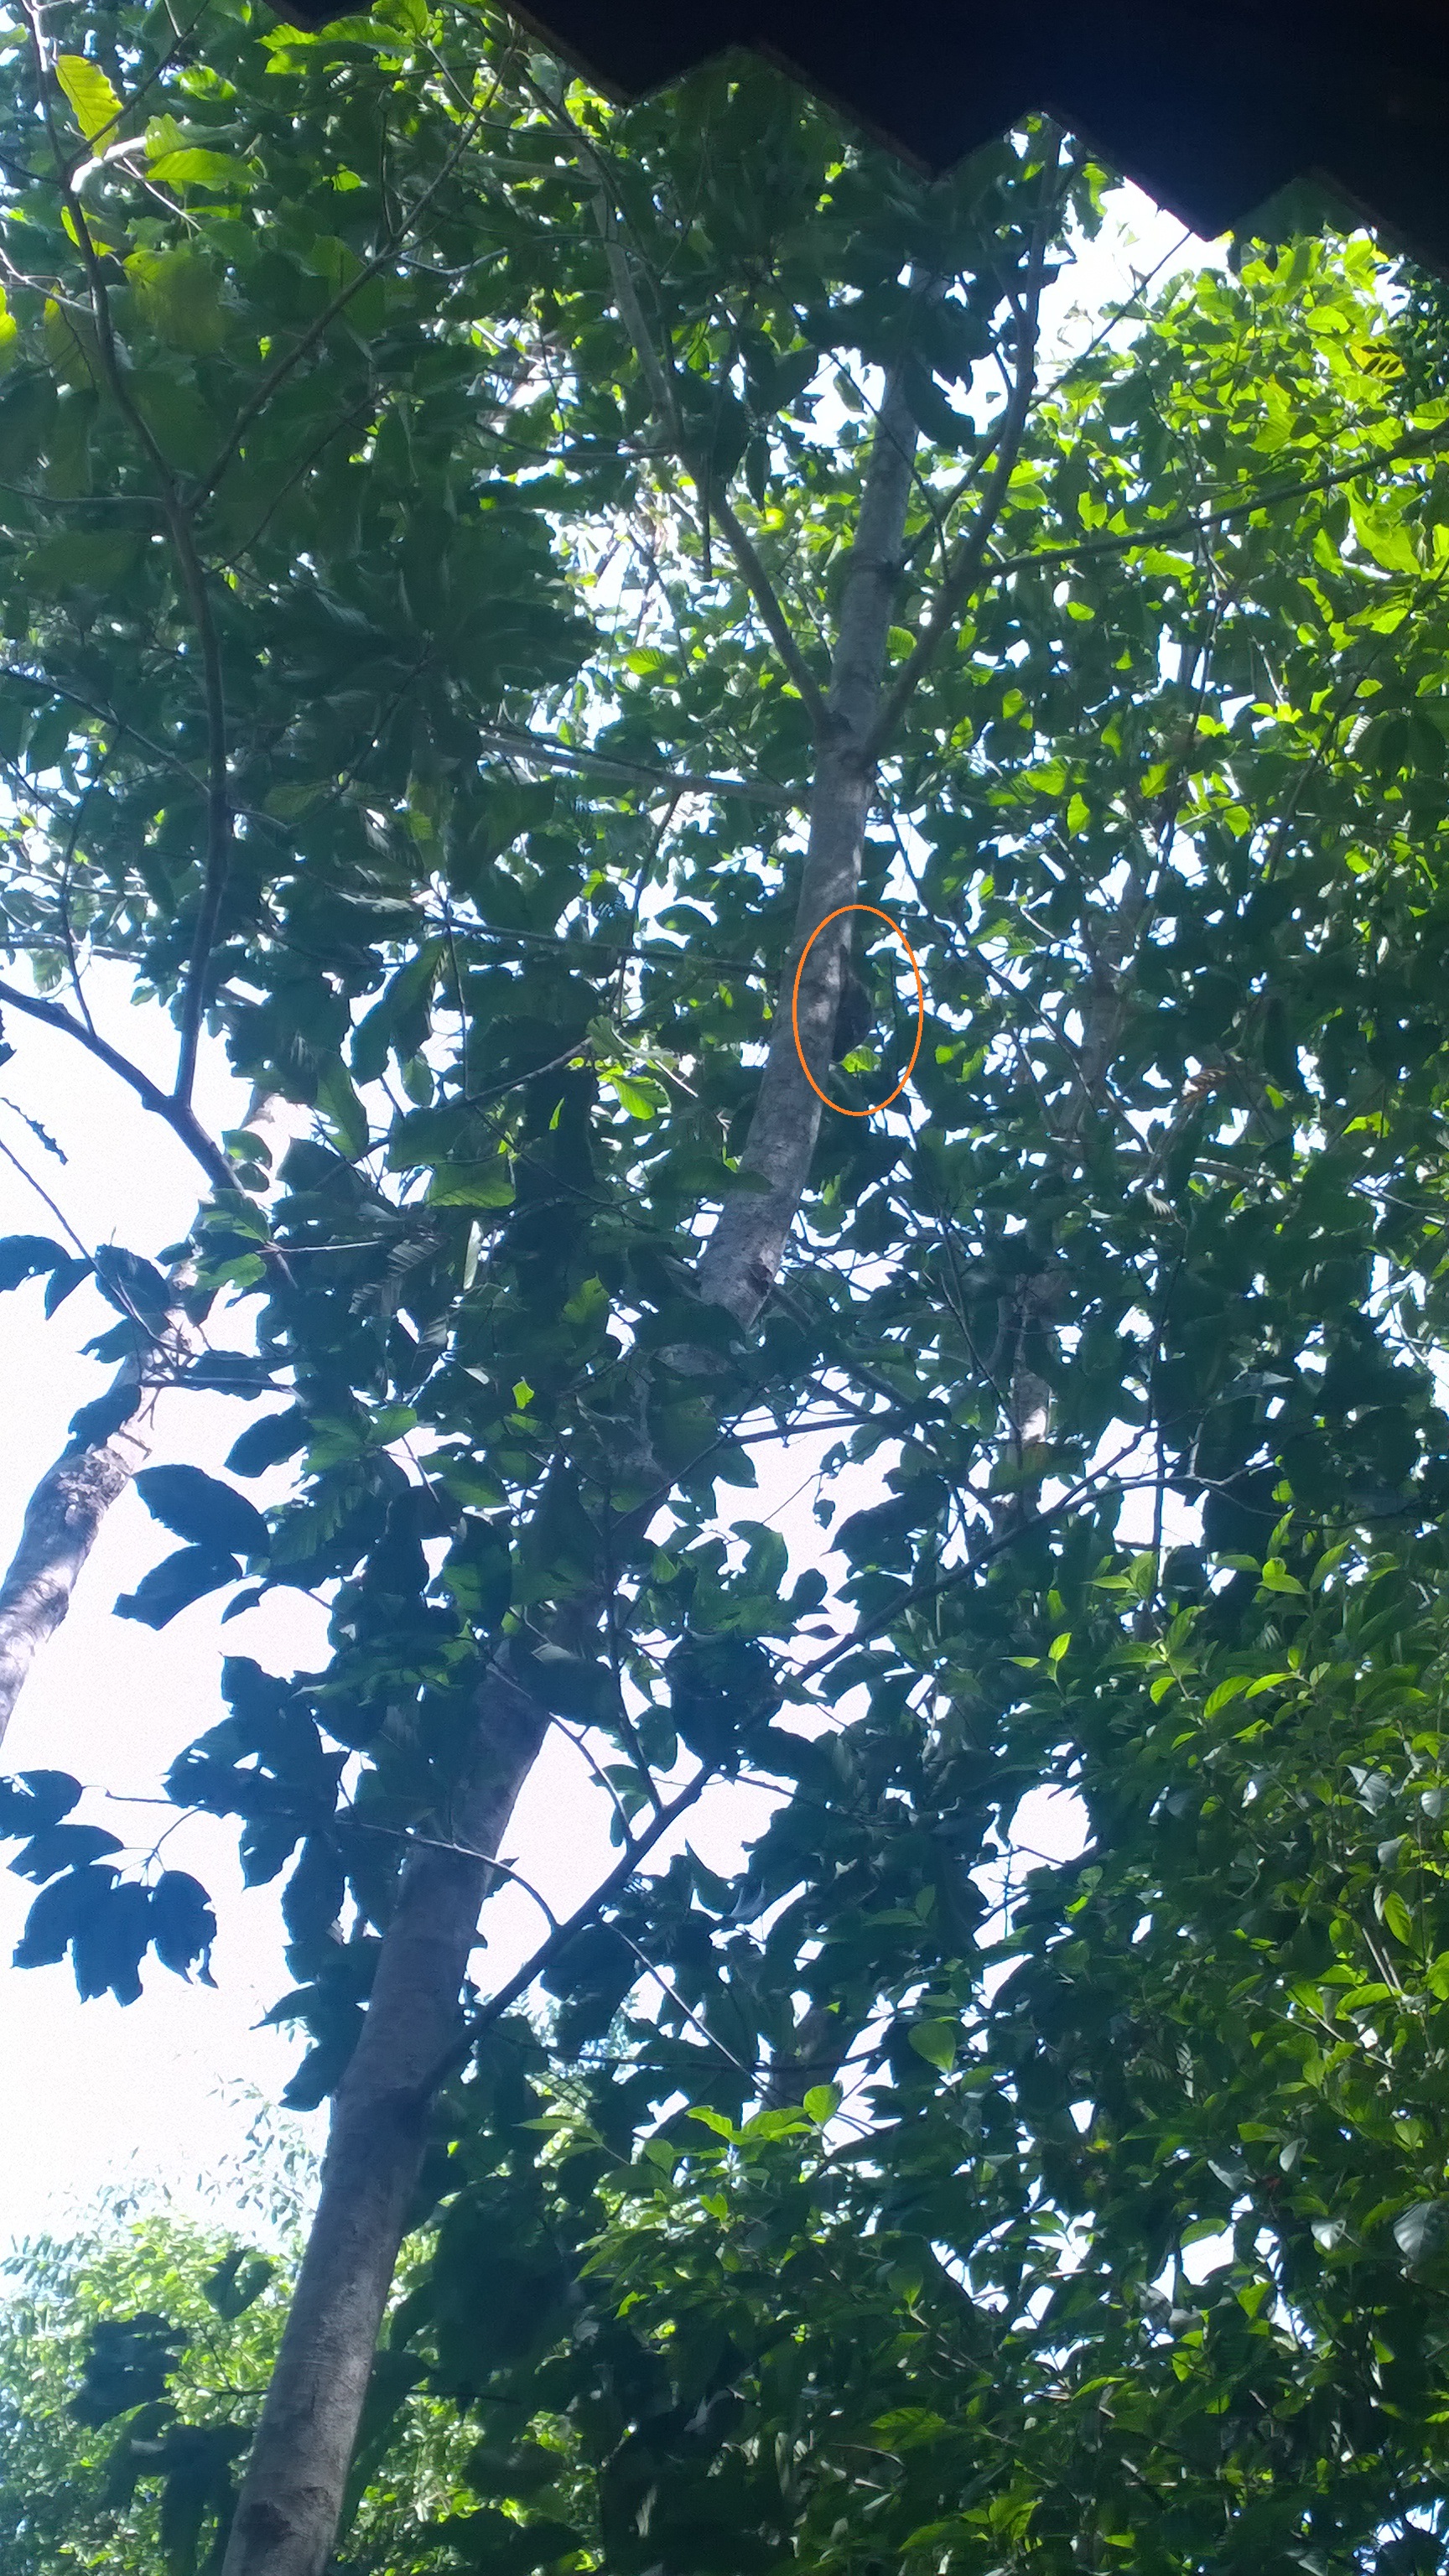 A flying lemur, native animal to the Langkawi forests, sleeping on the side of a tree during daytime